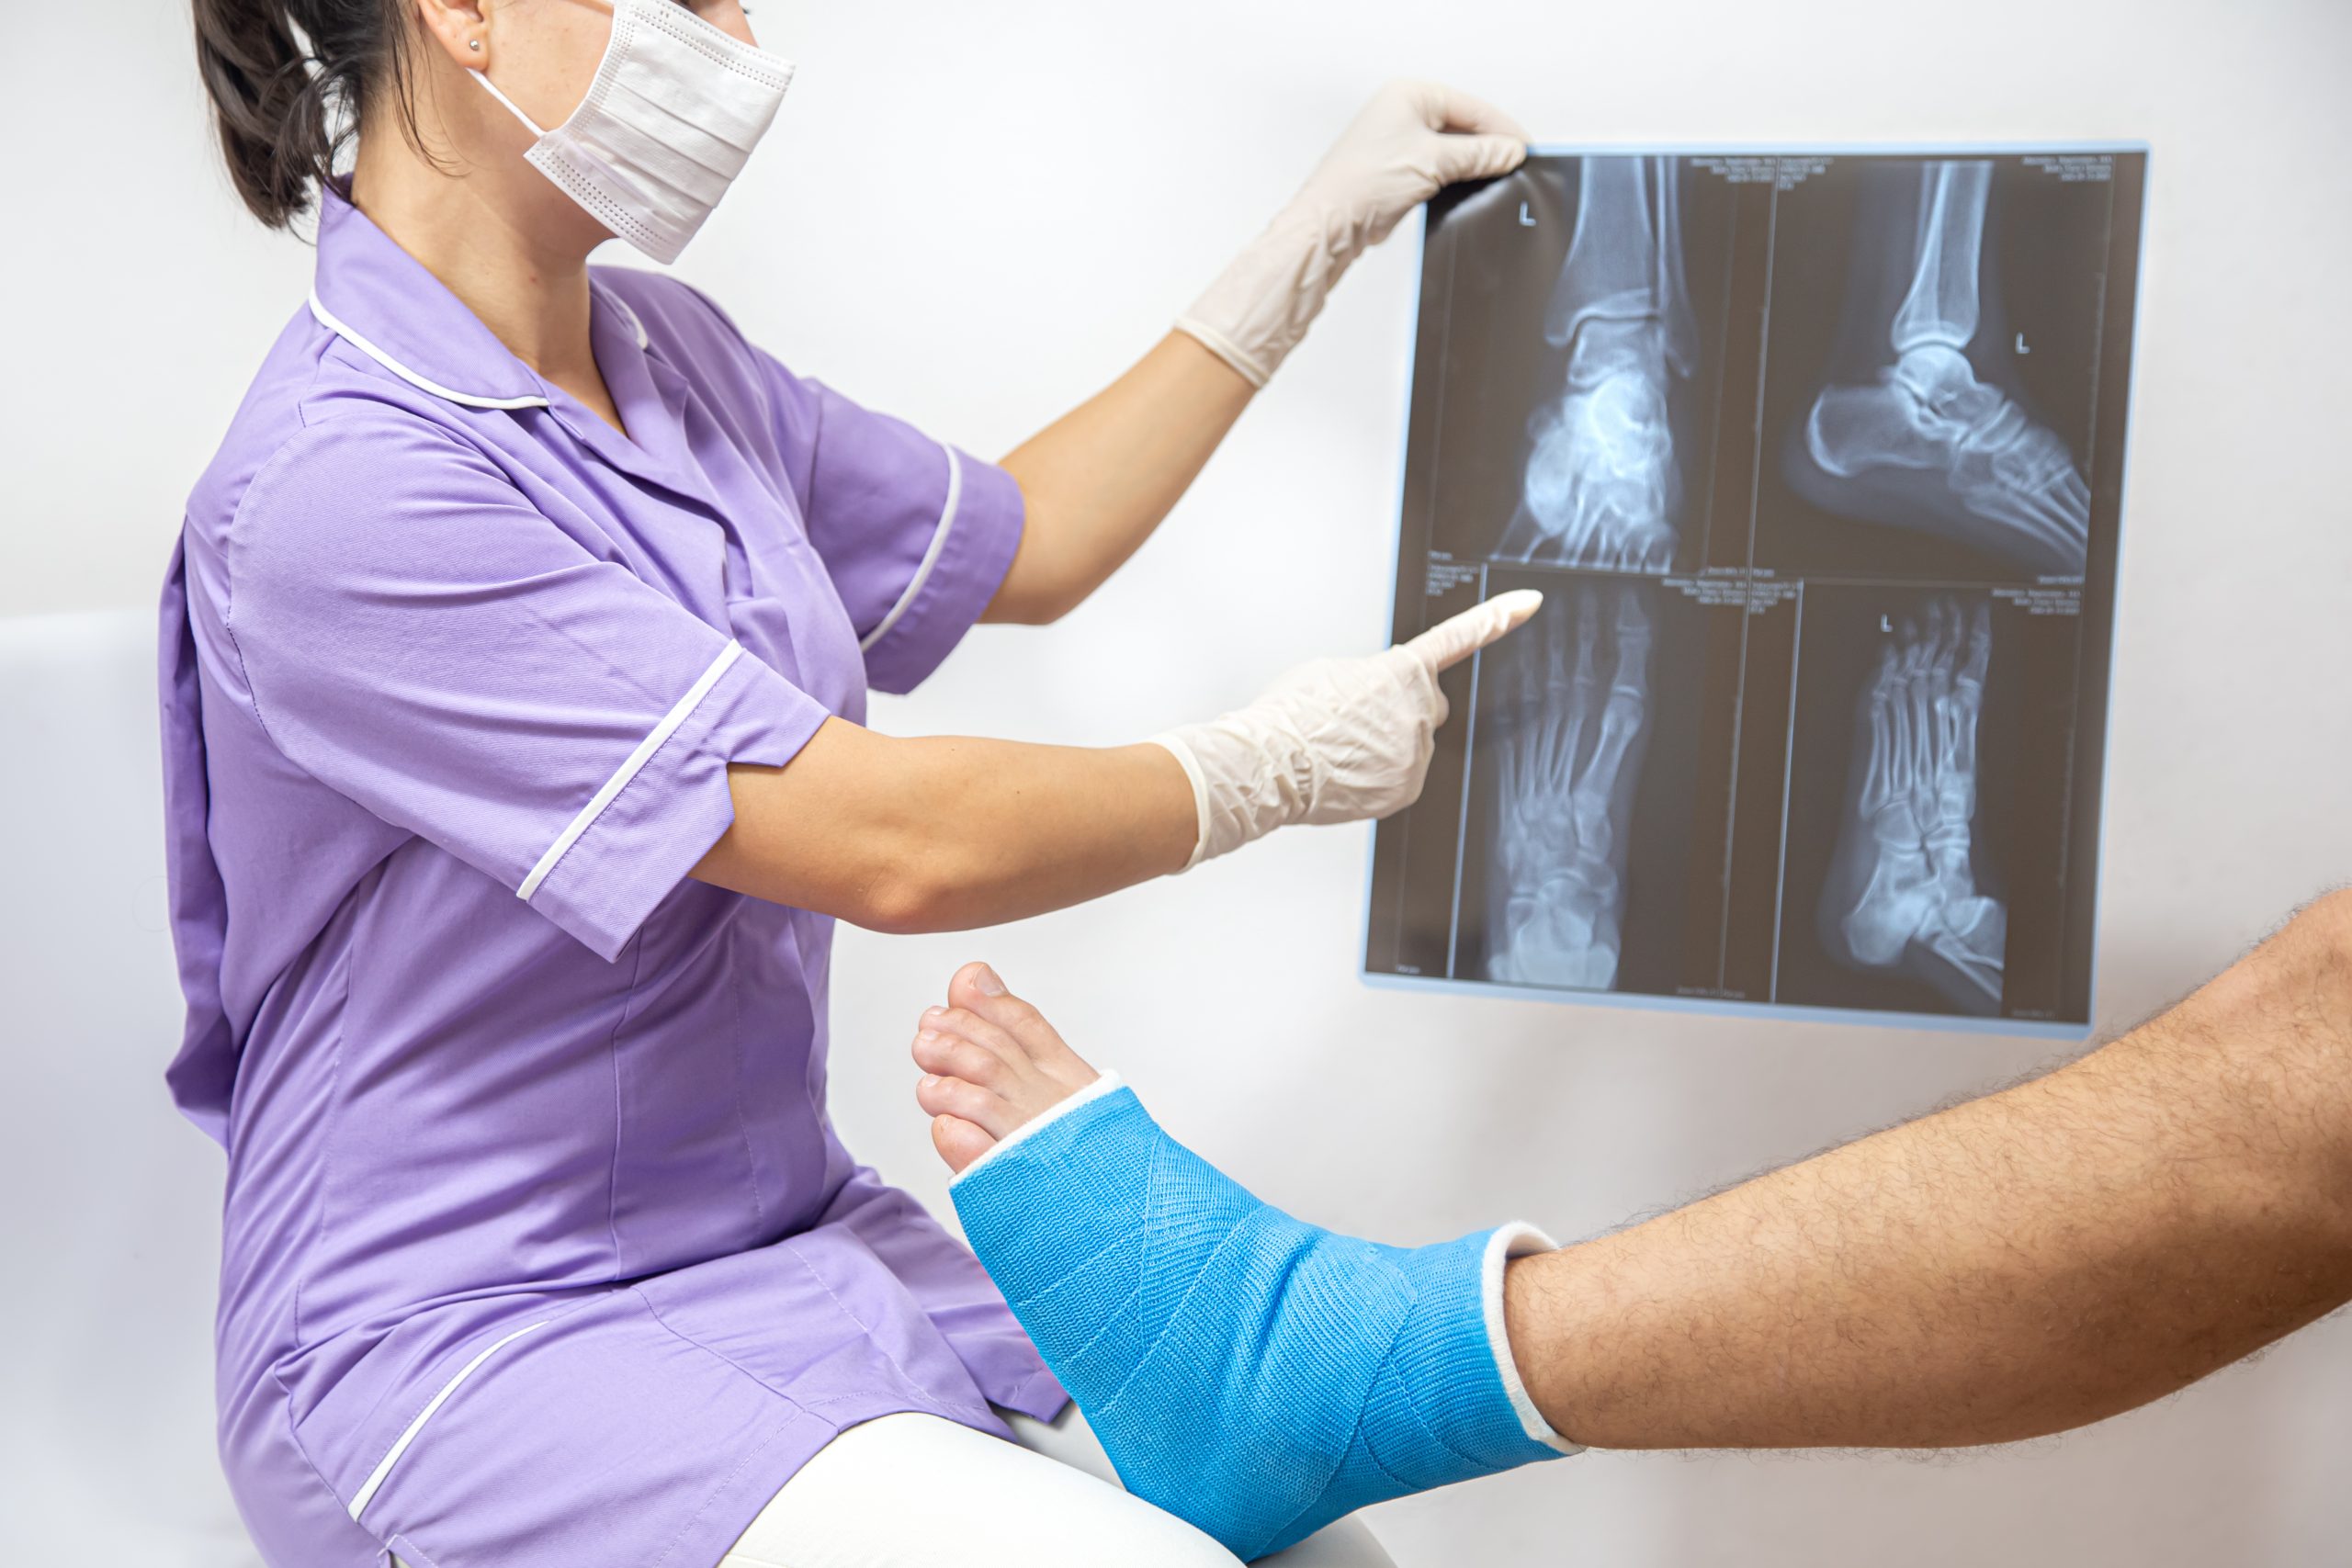 Osteopenia and Osteoporosis